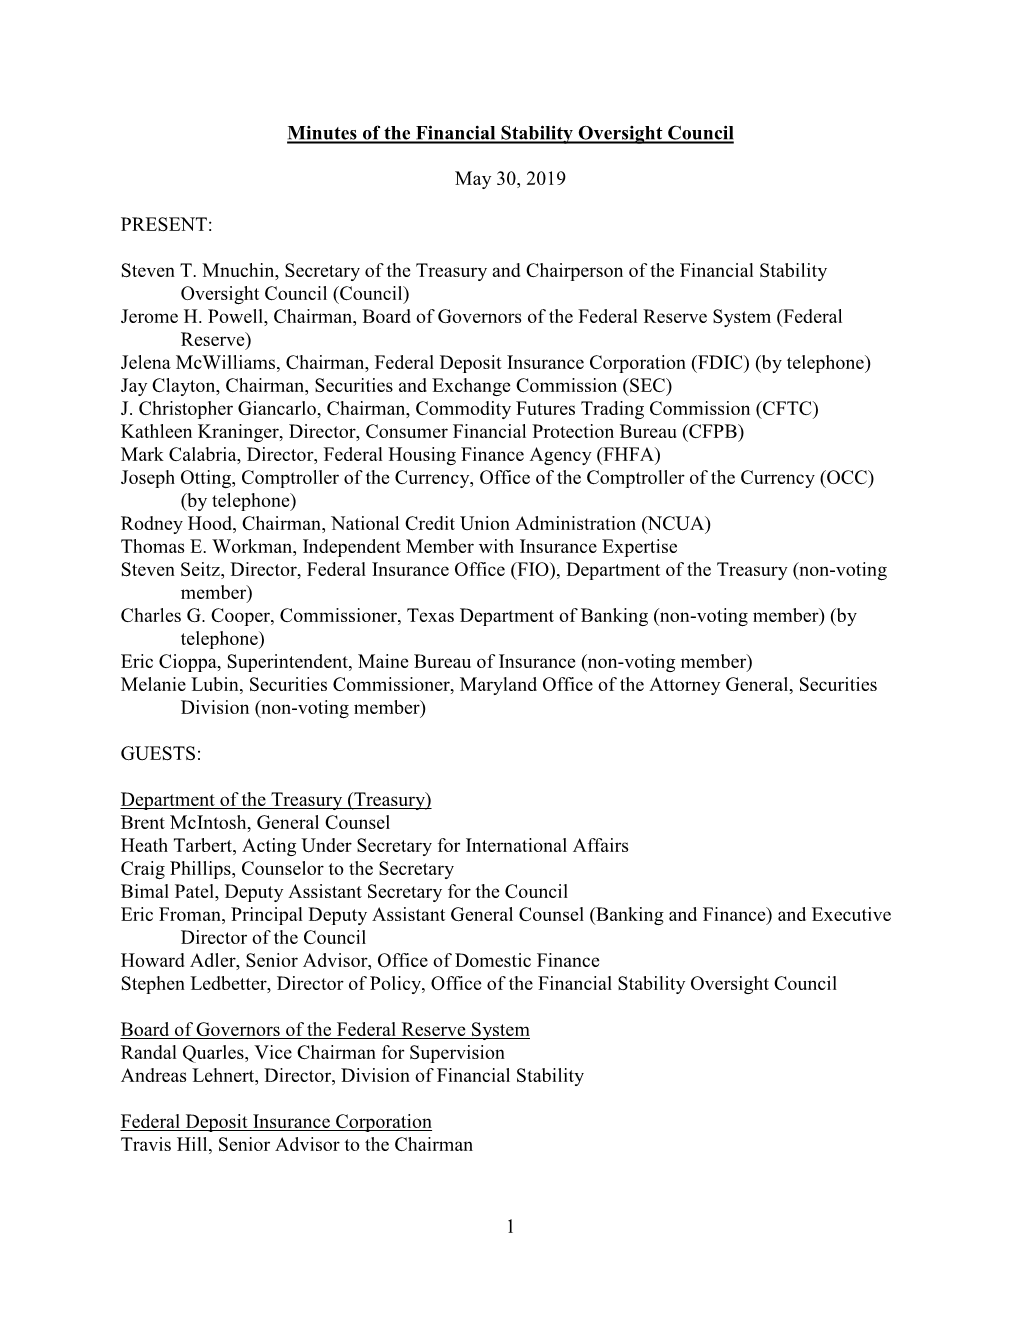 Minutes of the Financial Stability Oversight Council, May 30, 2019